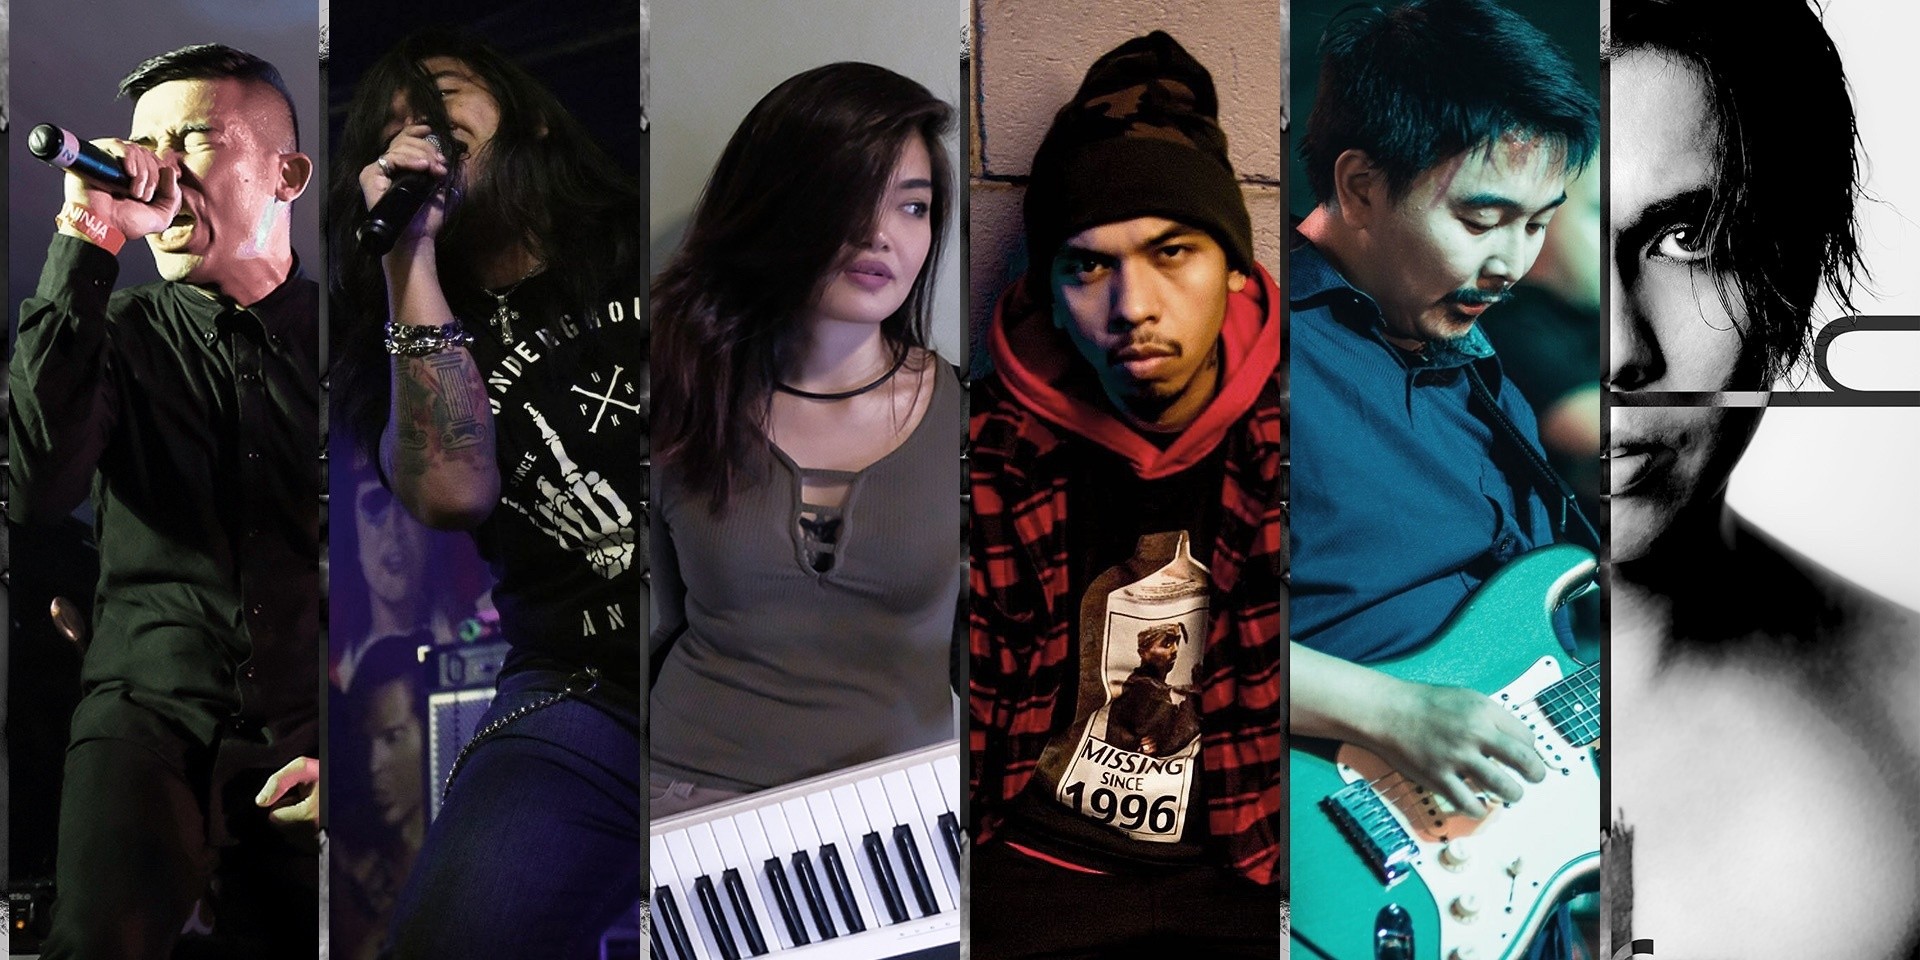 Cucay Pagdilao enlists Duran, Hale, Loonie, and more for music video launch